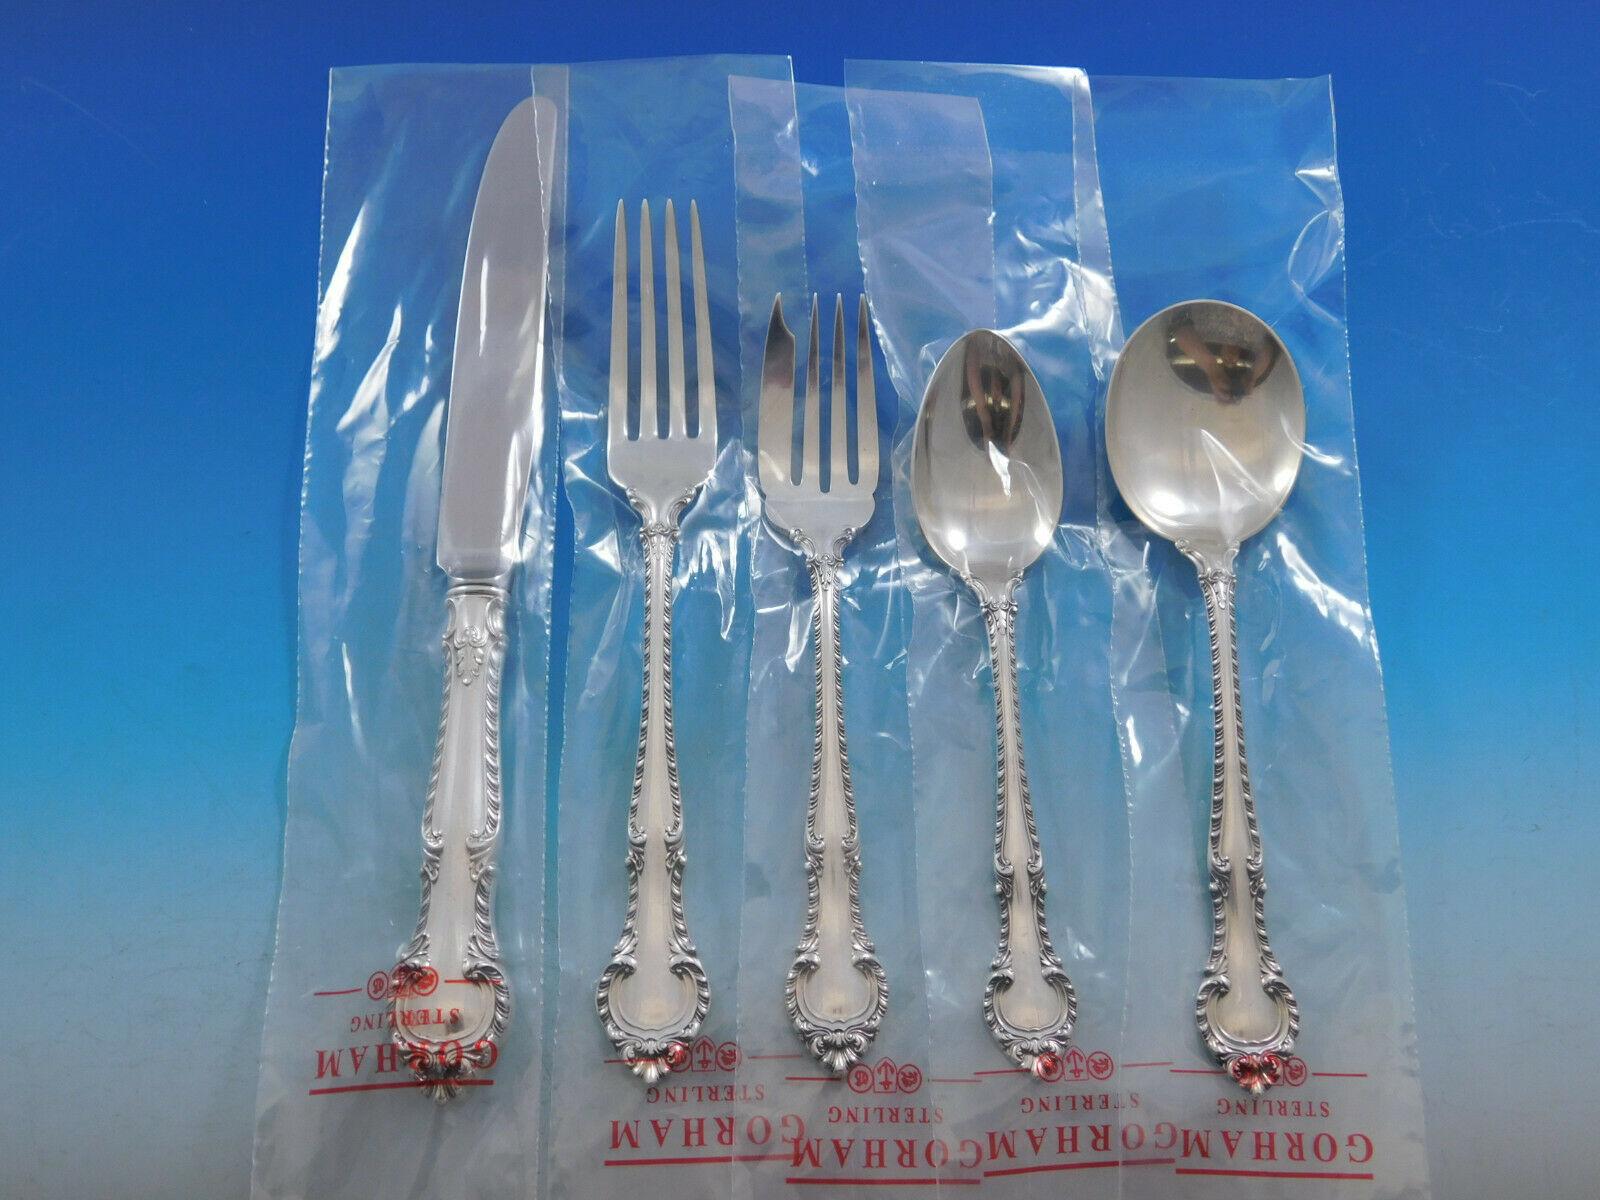 New, unused English Gadroon by Gorham sterling silver flatware set - 46 pieces. This set includes:

8 knives, 8 3/4